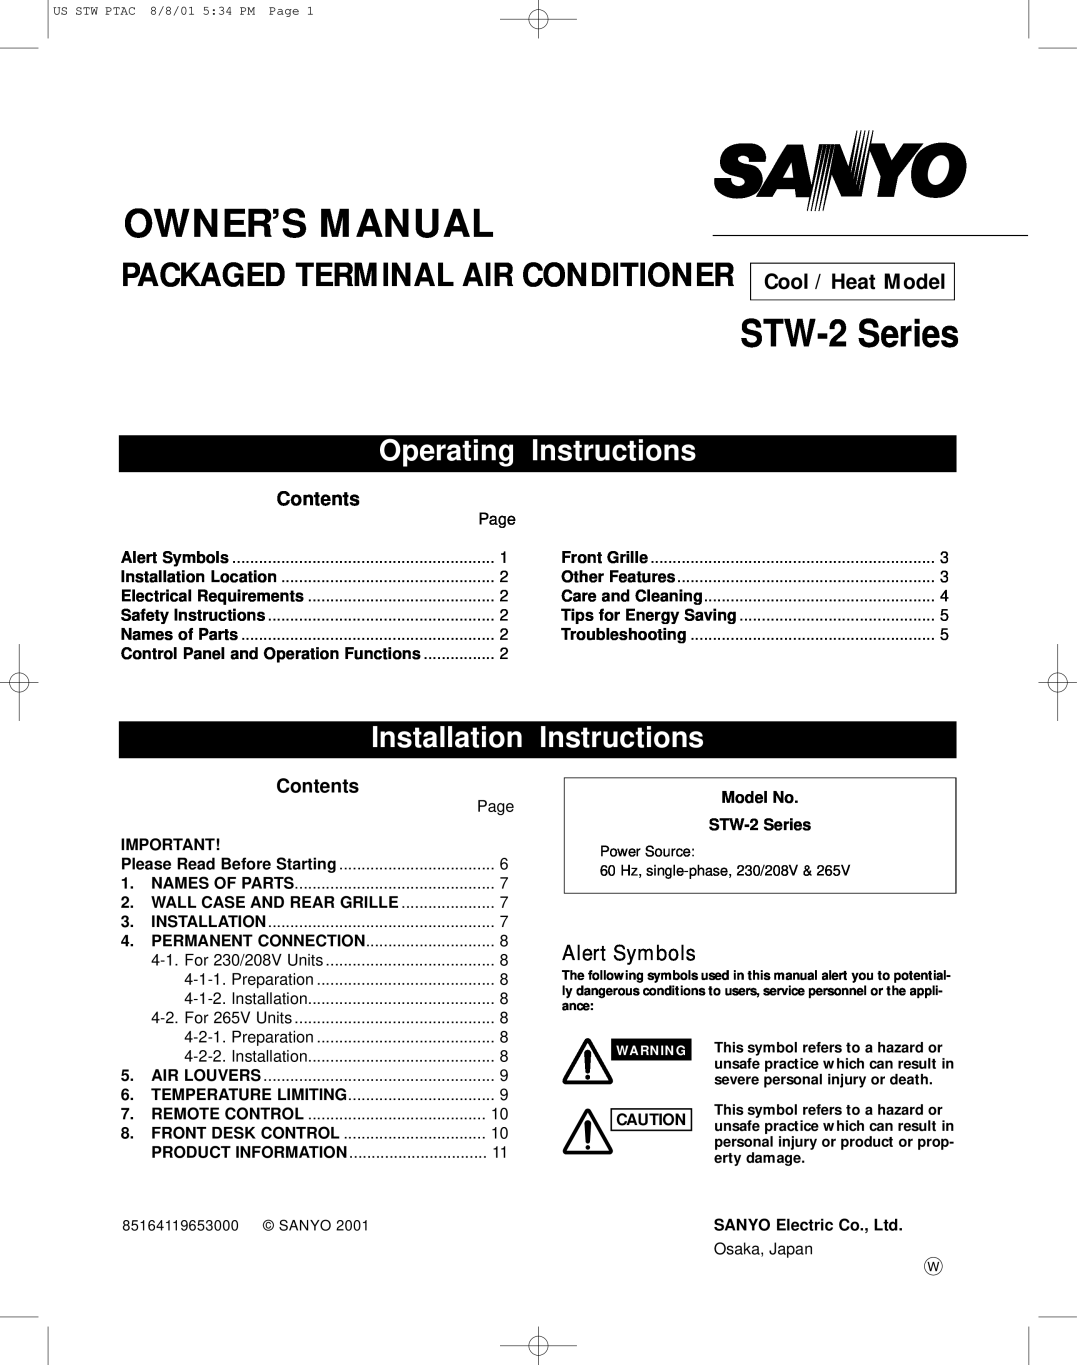 Sanyo owner manual Alert Symbols, Model No STW-2Series, Packaged Terminal Air Conditioner, Operating, Instructions 